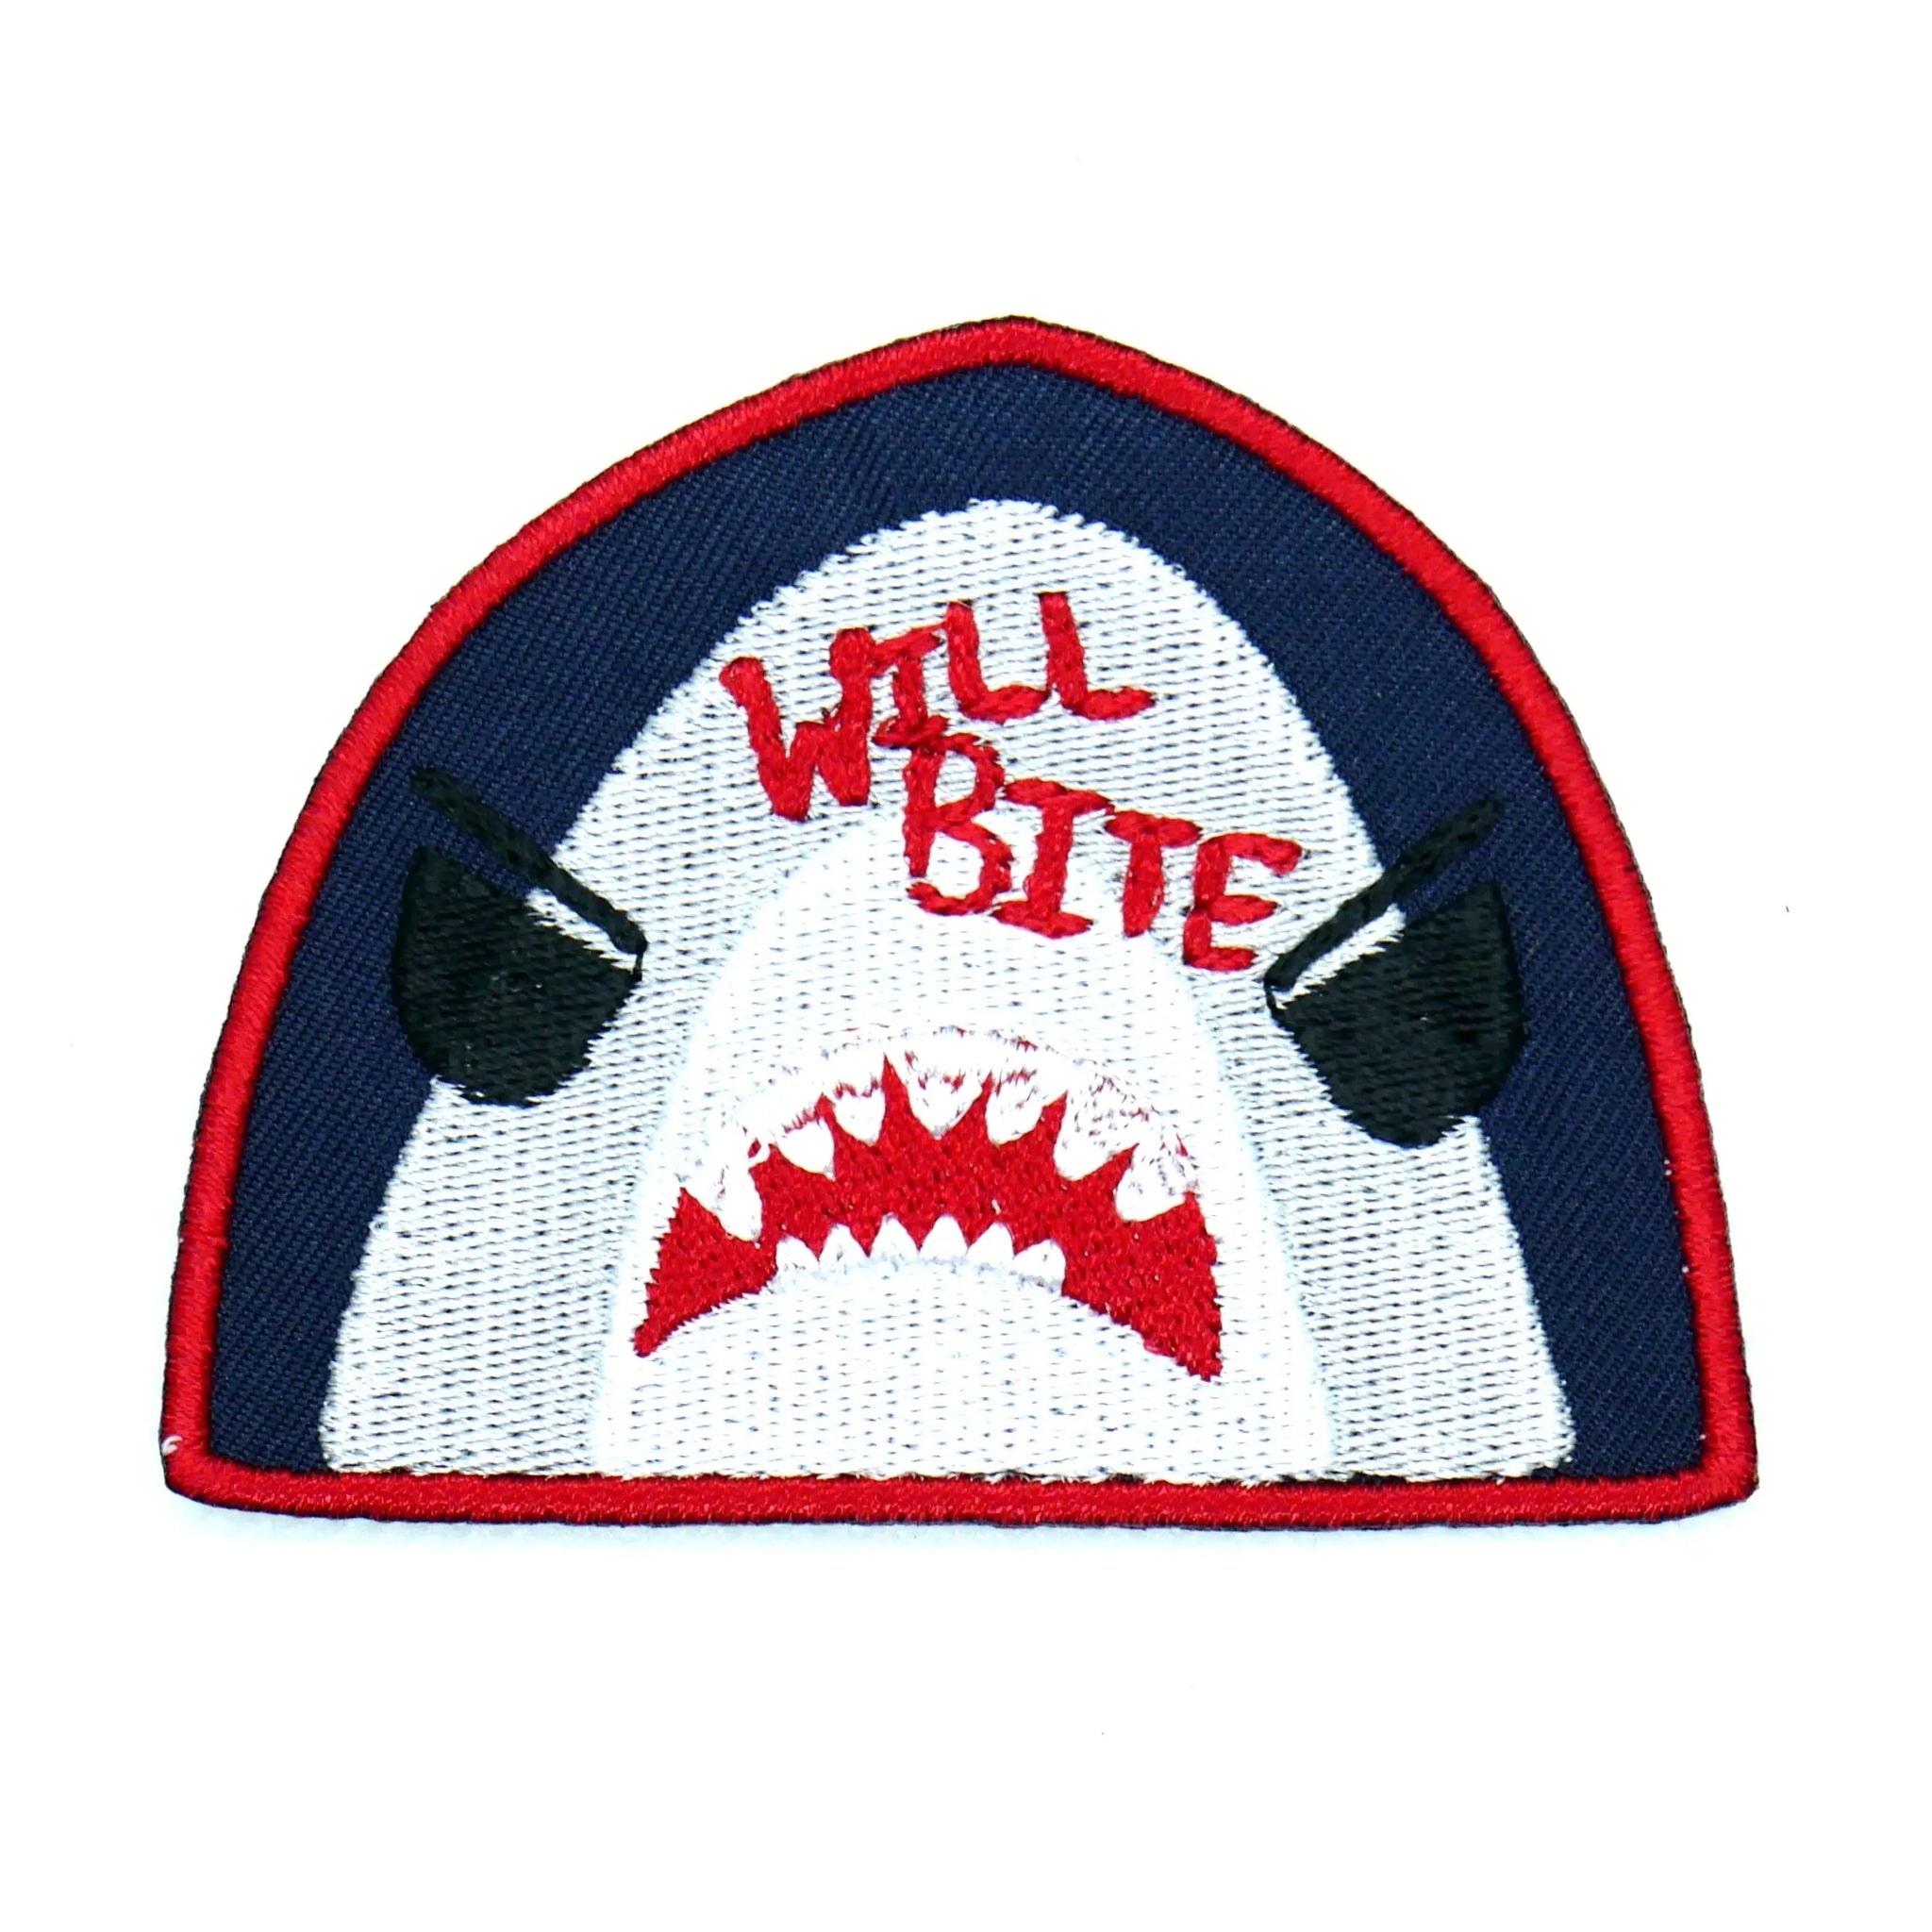 A navy blue cotton twill patch with a red border of a Great White shark with cartoon eyes and an open mouth. The words “Will Bite” are written in red at the top of the shark